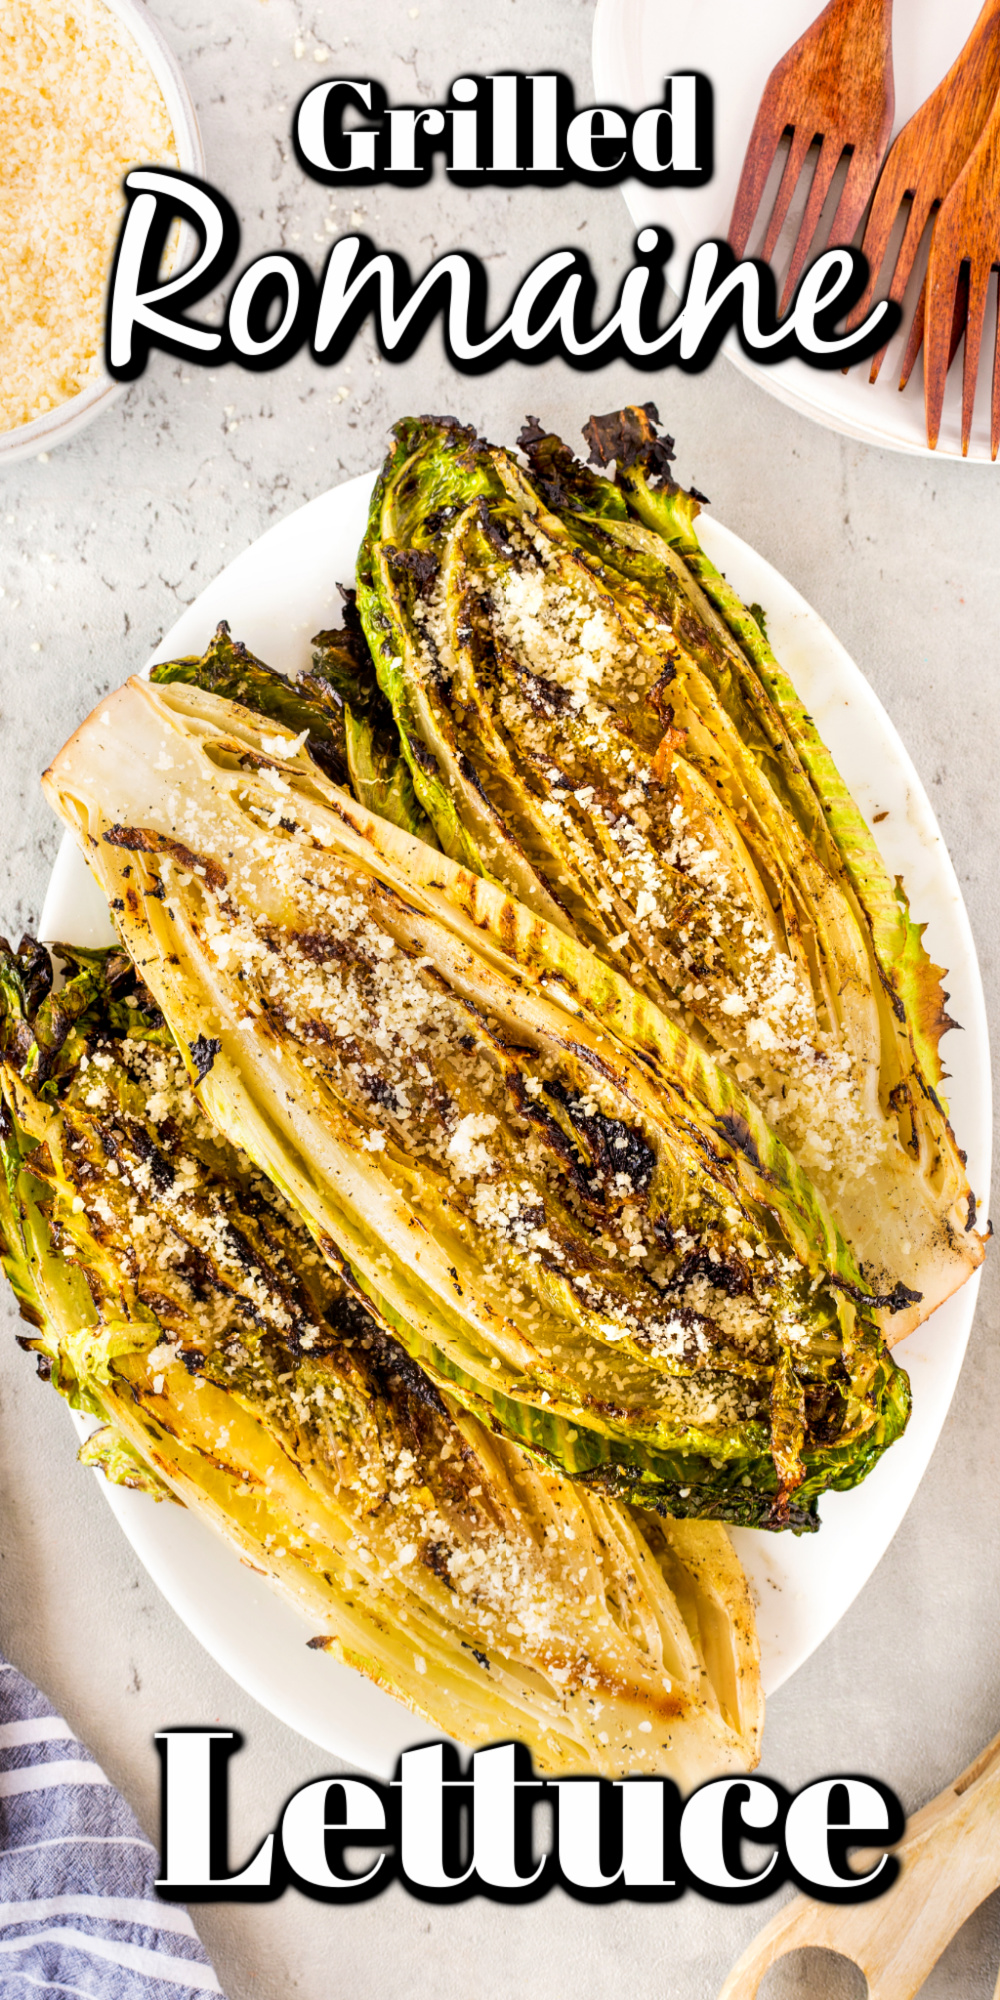 Grilled Romaine Lettuce might be a little unusual, but it is a special dish that I know you will love!